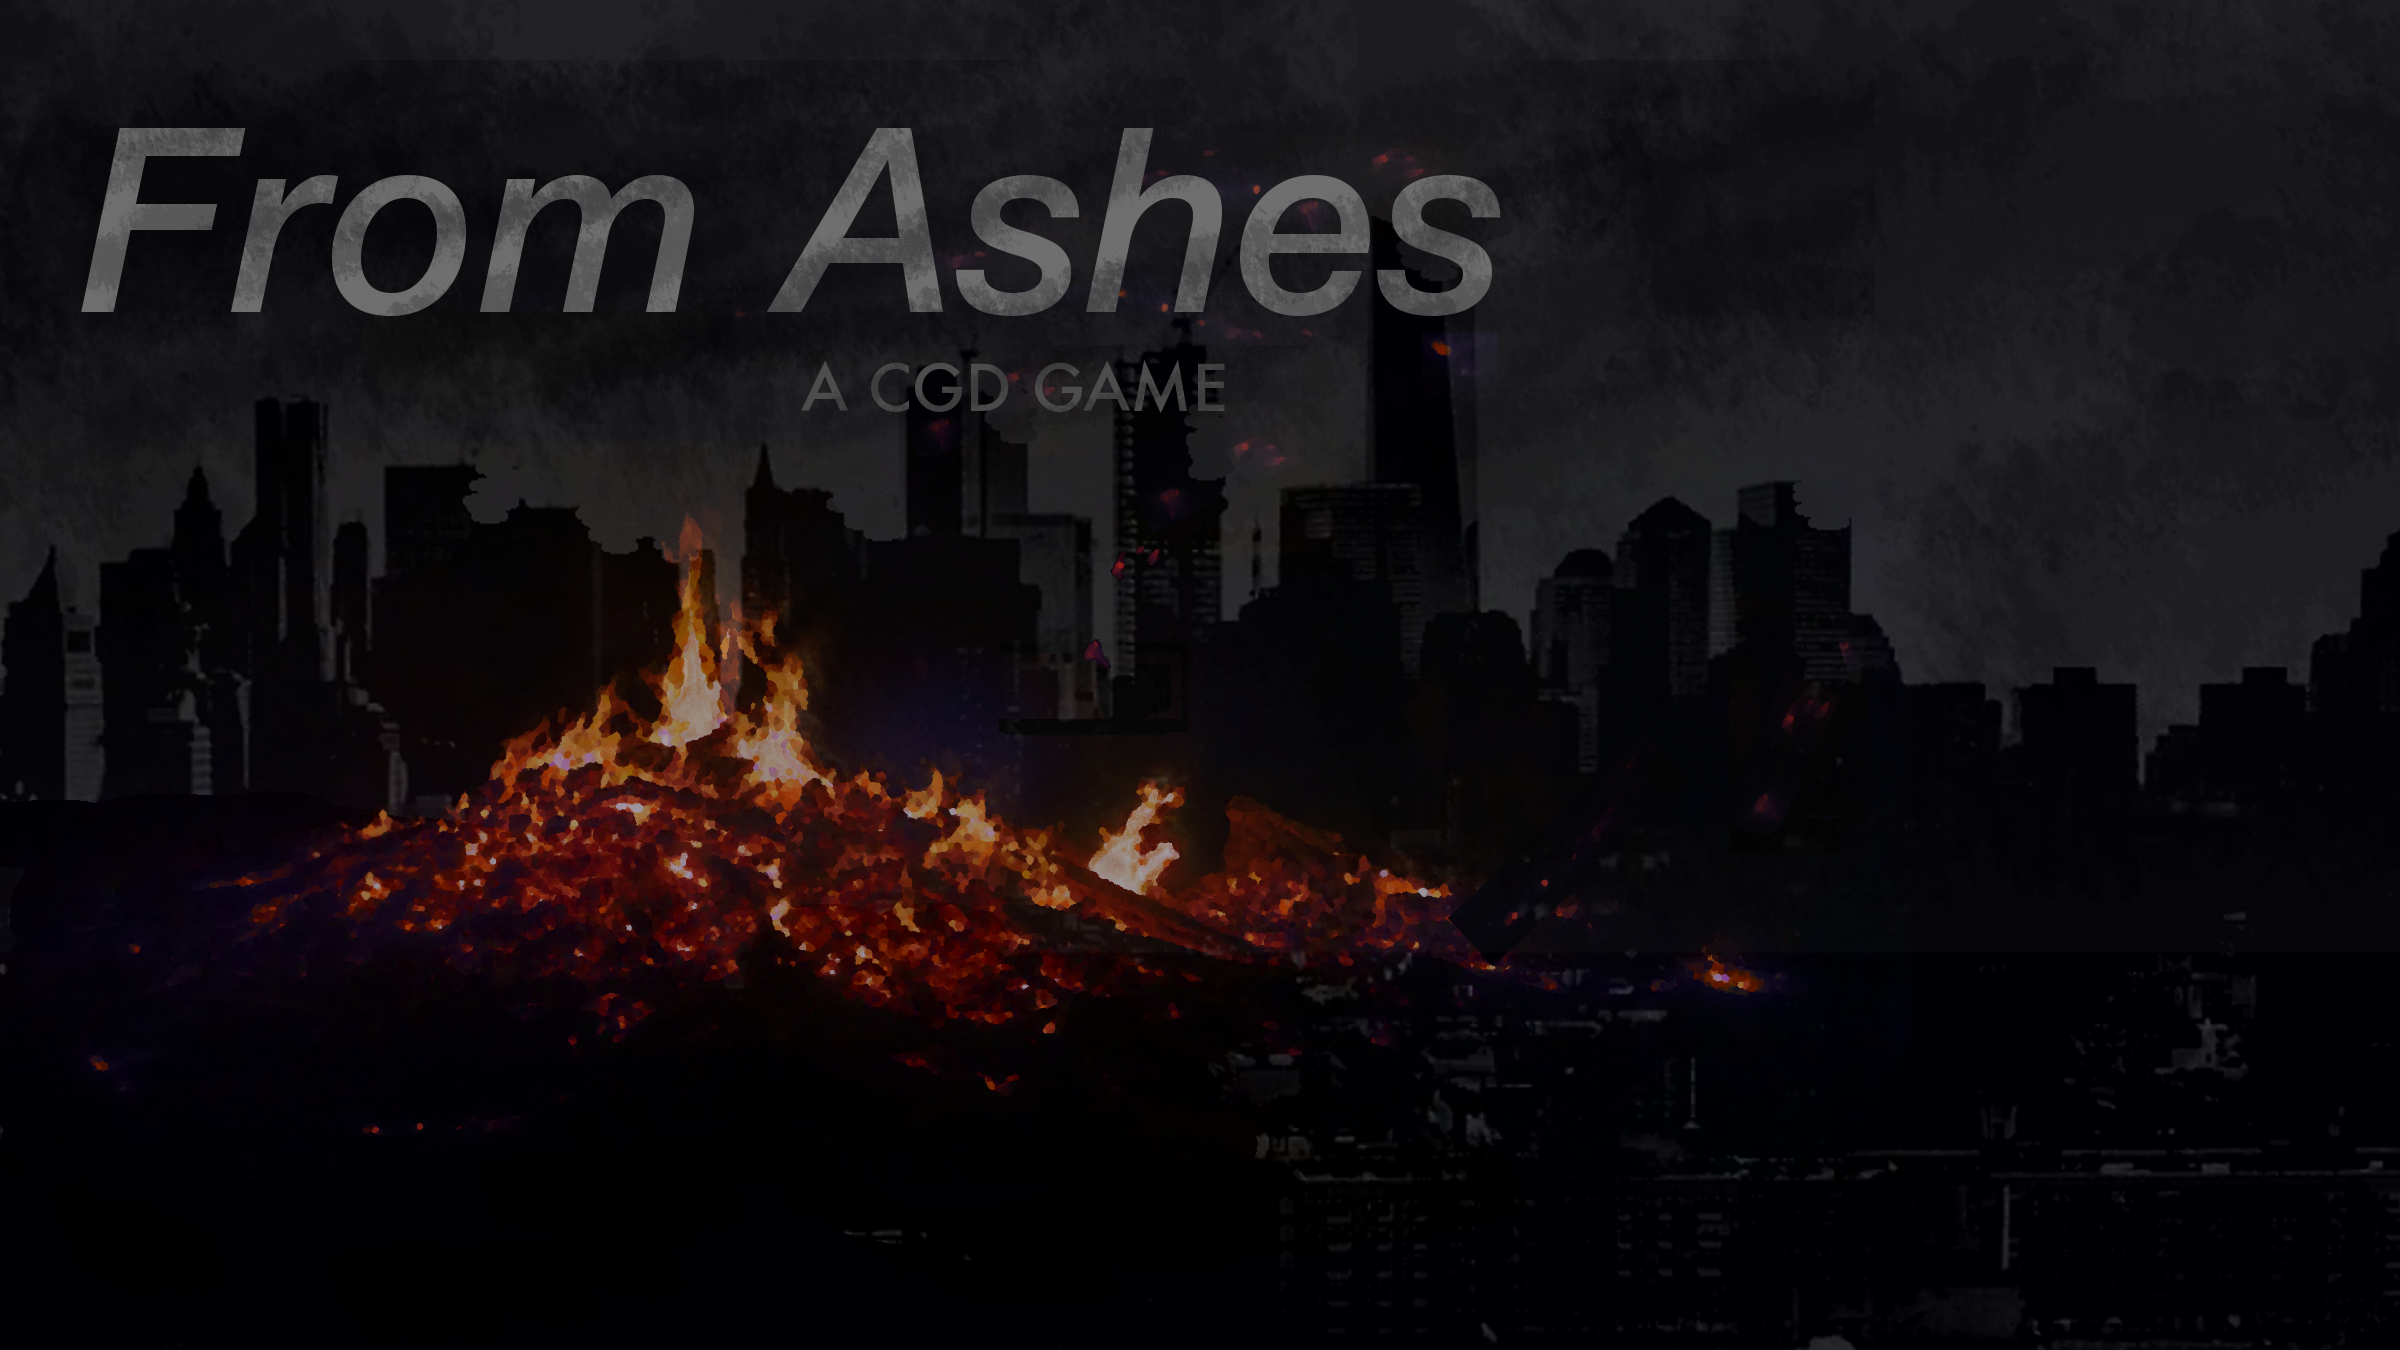 From Ashes